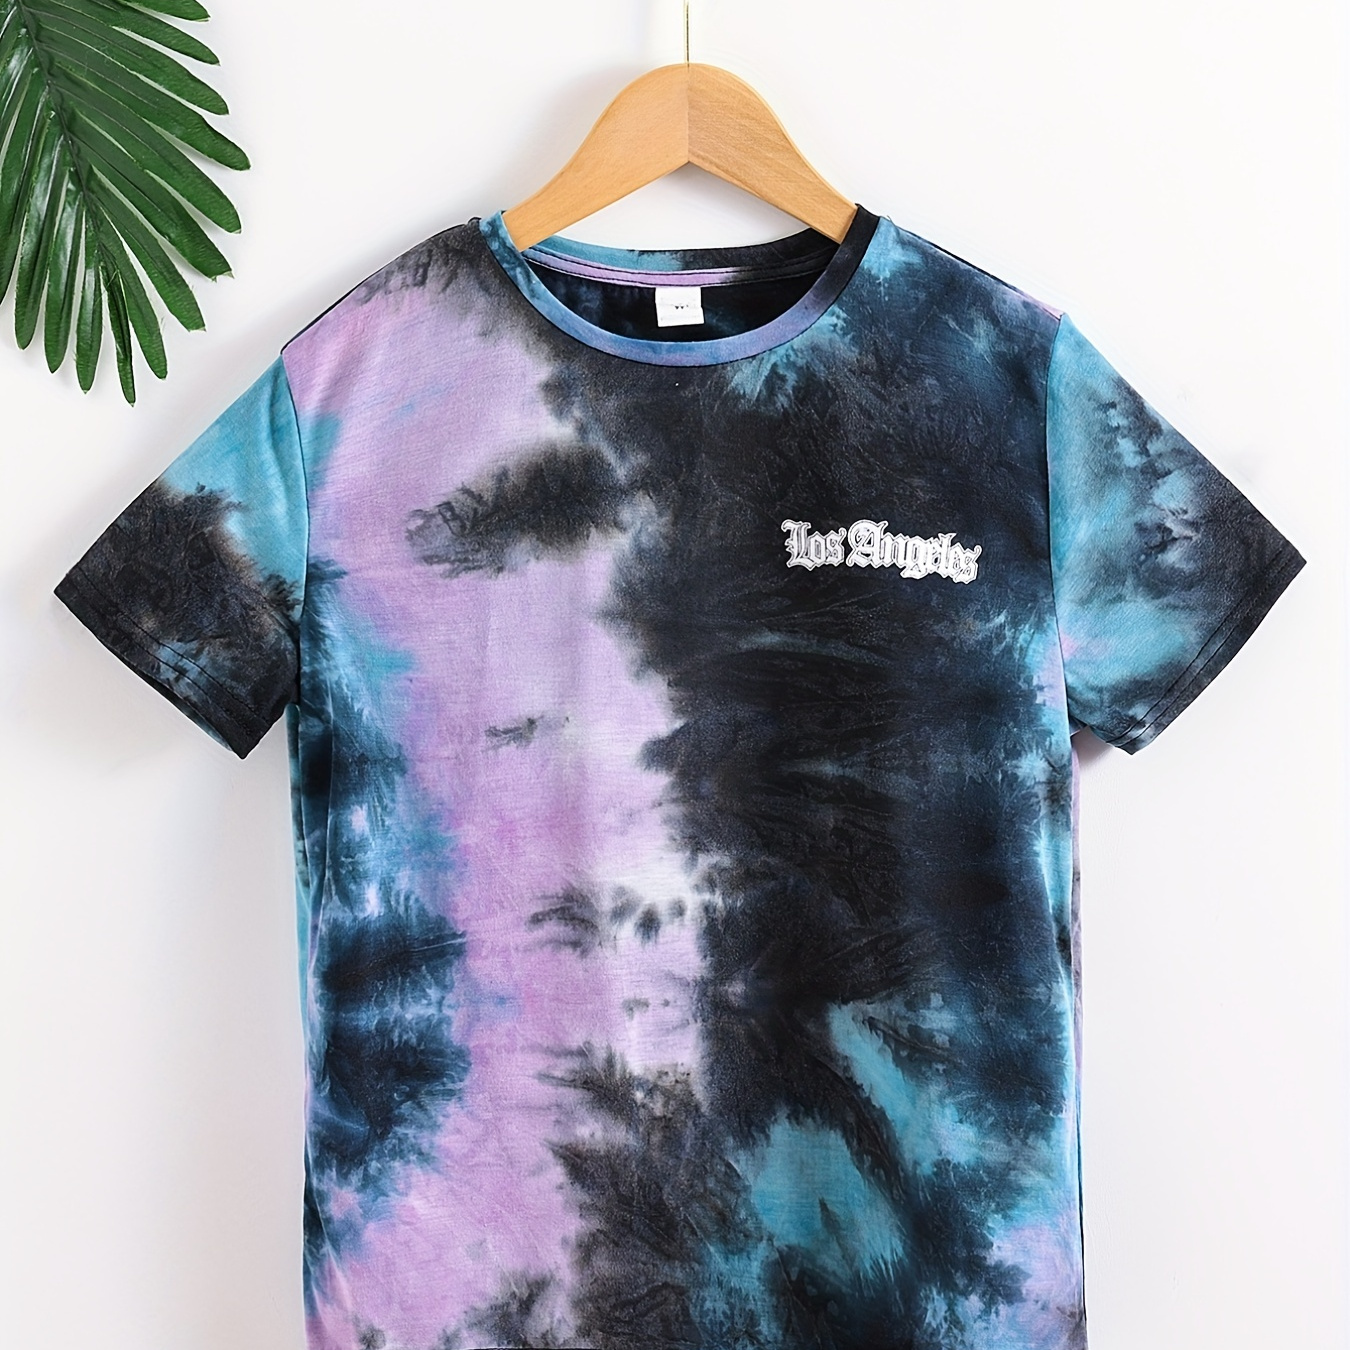 

Stylish Tie Dye Los Angeles Letter Print Boys Creative T-shirt, Casual Lightweight Comfy Short Sleeve Tee Tops, Kids Clothings For Summer